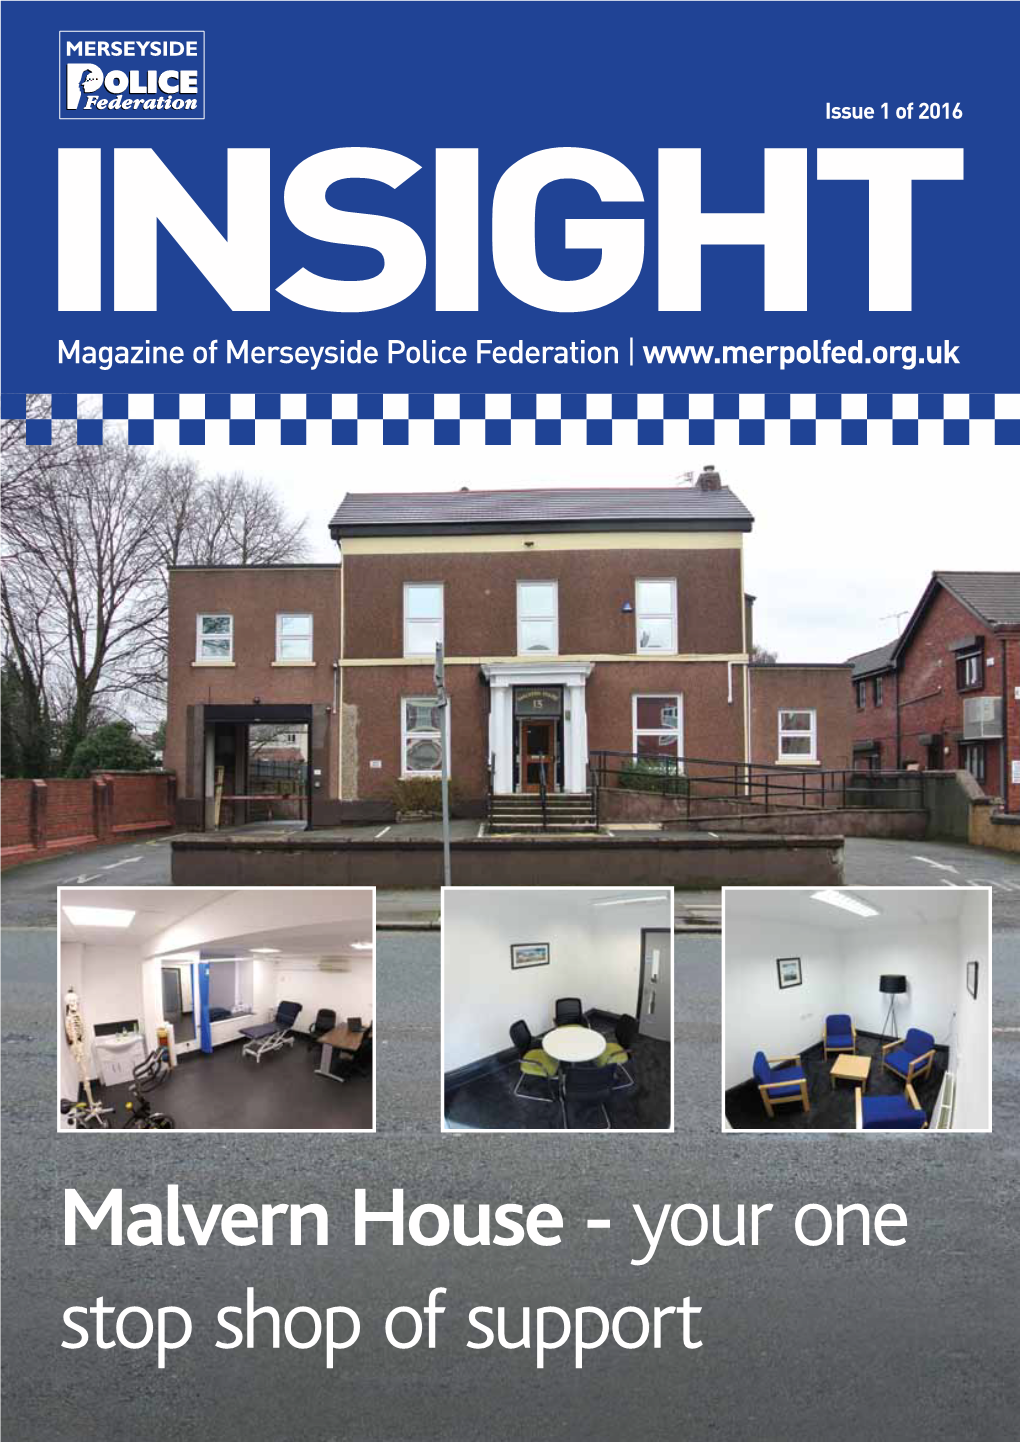 Insight Magazine: Post Incident Procedure 6 Editor – Peter Singleton JBB Chairman Producer – Paul Kinsella, Business Manager Welfare, Support and Equality Update 8